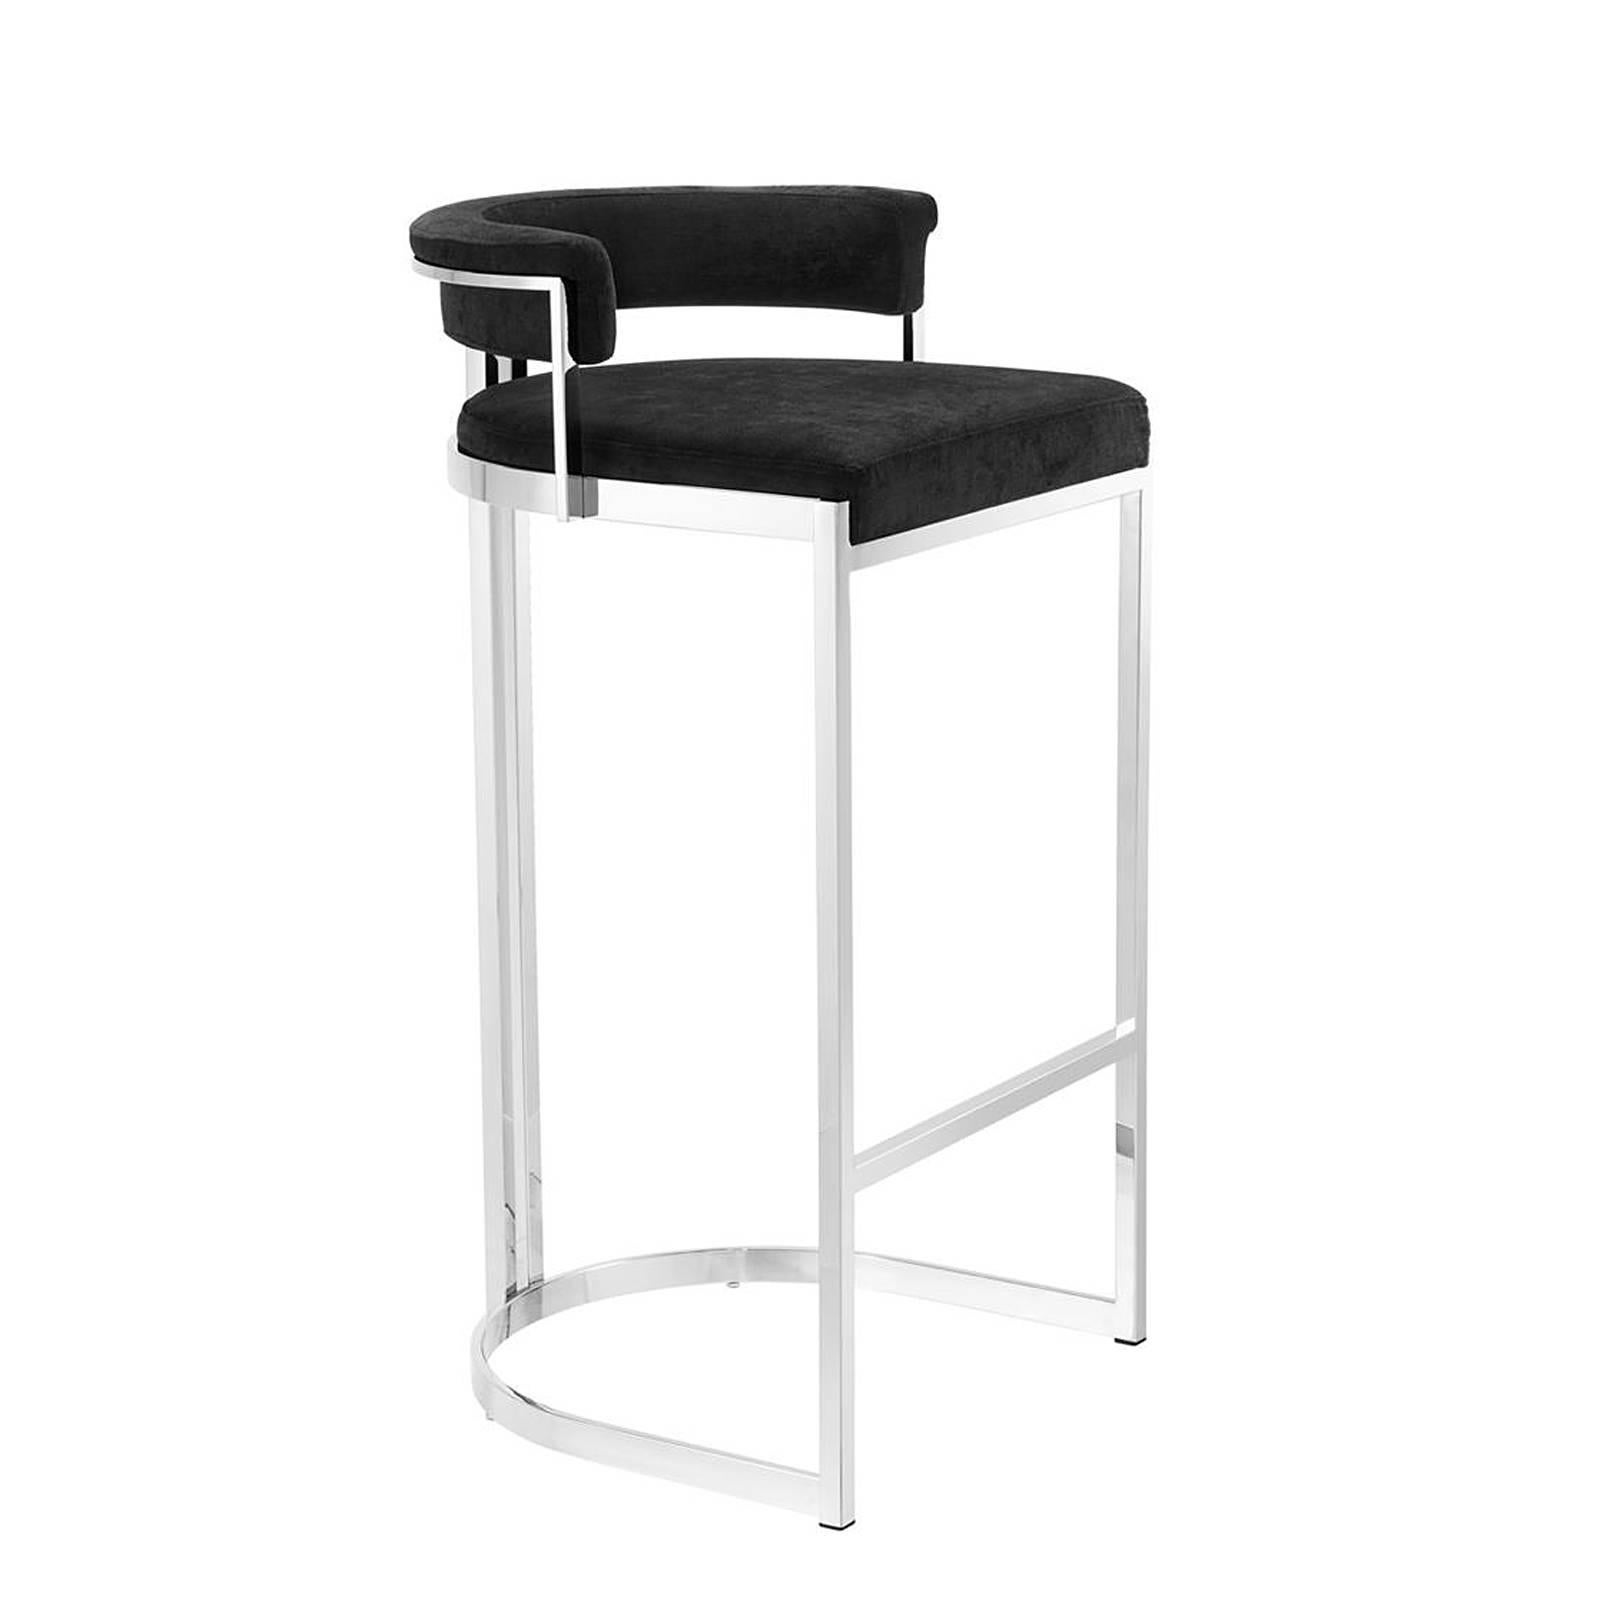 Bar Stool Kant L with structure in polished 
stainless steel. Seat upholstered with black 
velvet fabric, fire retardant treatment.
Also available in Bar Stool Kant M-Medium.

